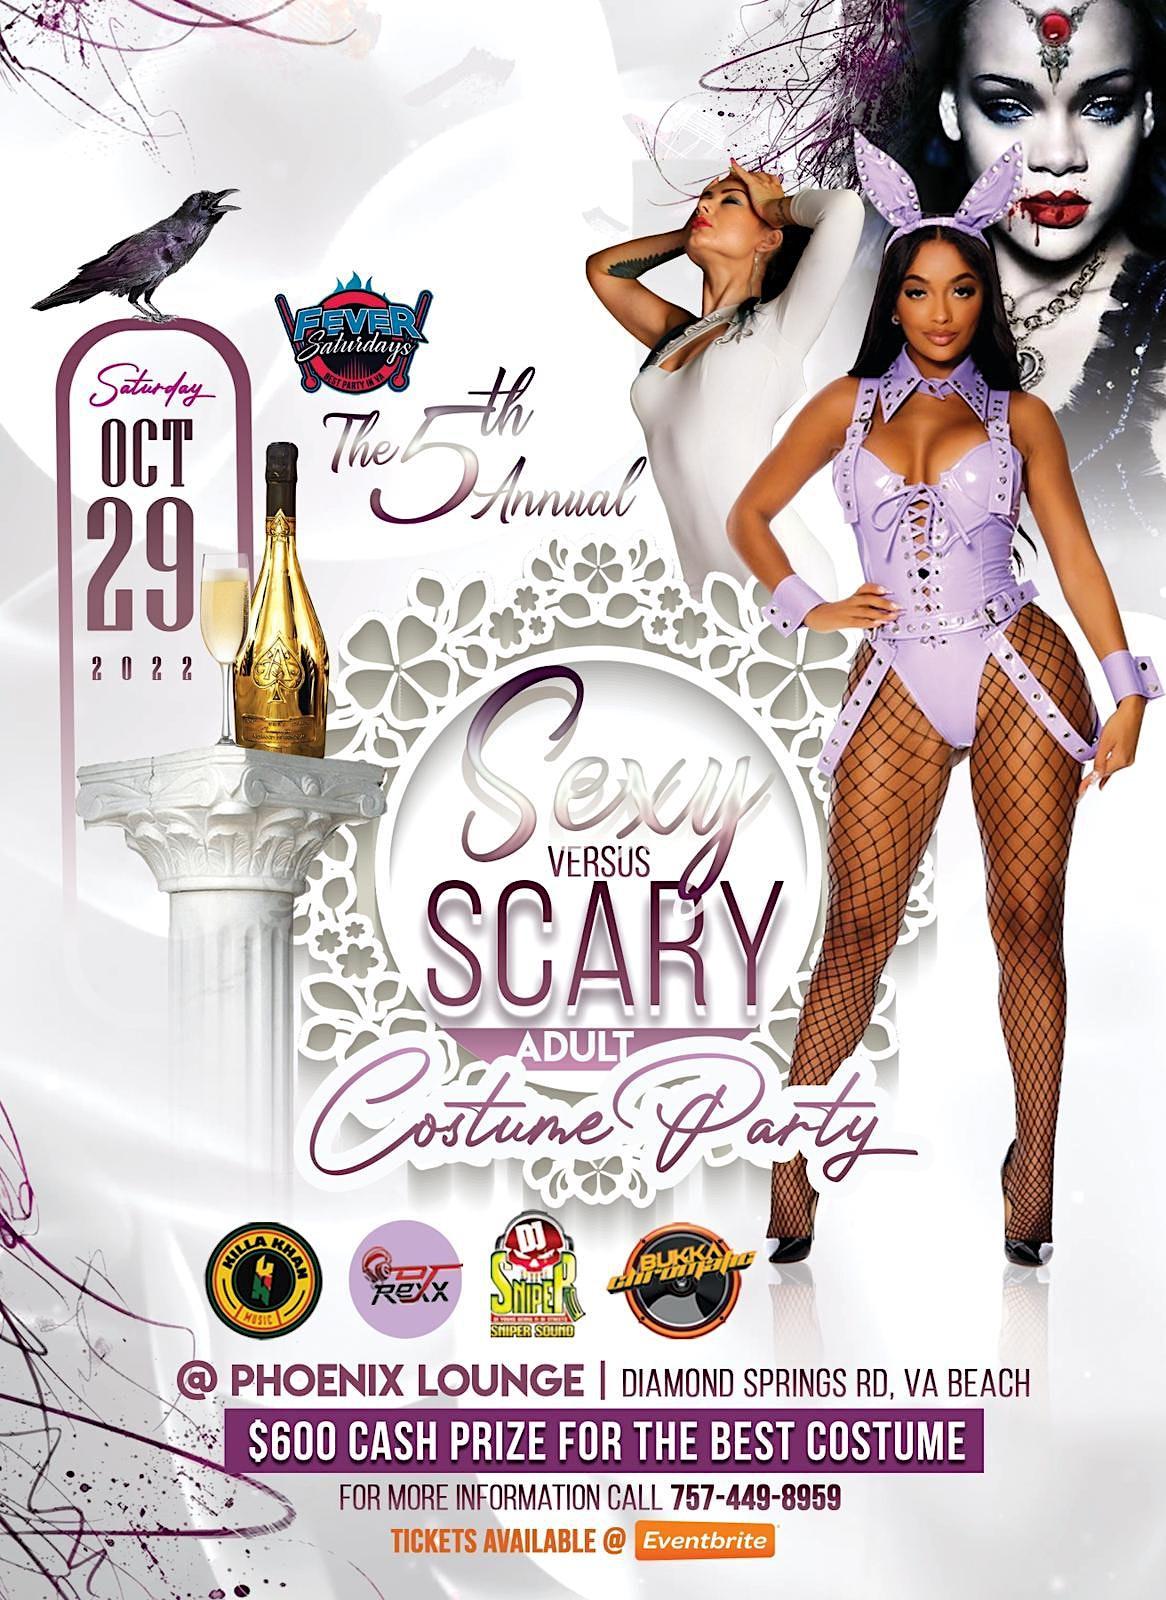 Sexy Vs Scary Adult Halloween Costume Party
Sat Oct 29, 10:00 PM - Sun Oct 30, 2:00 AM
in 10 days